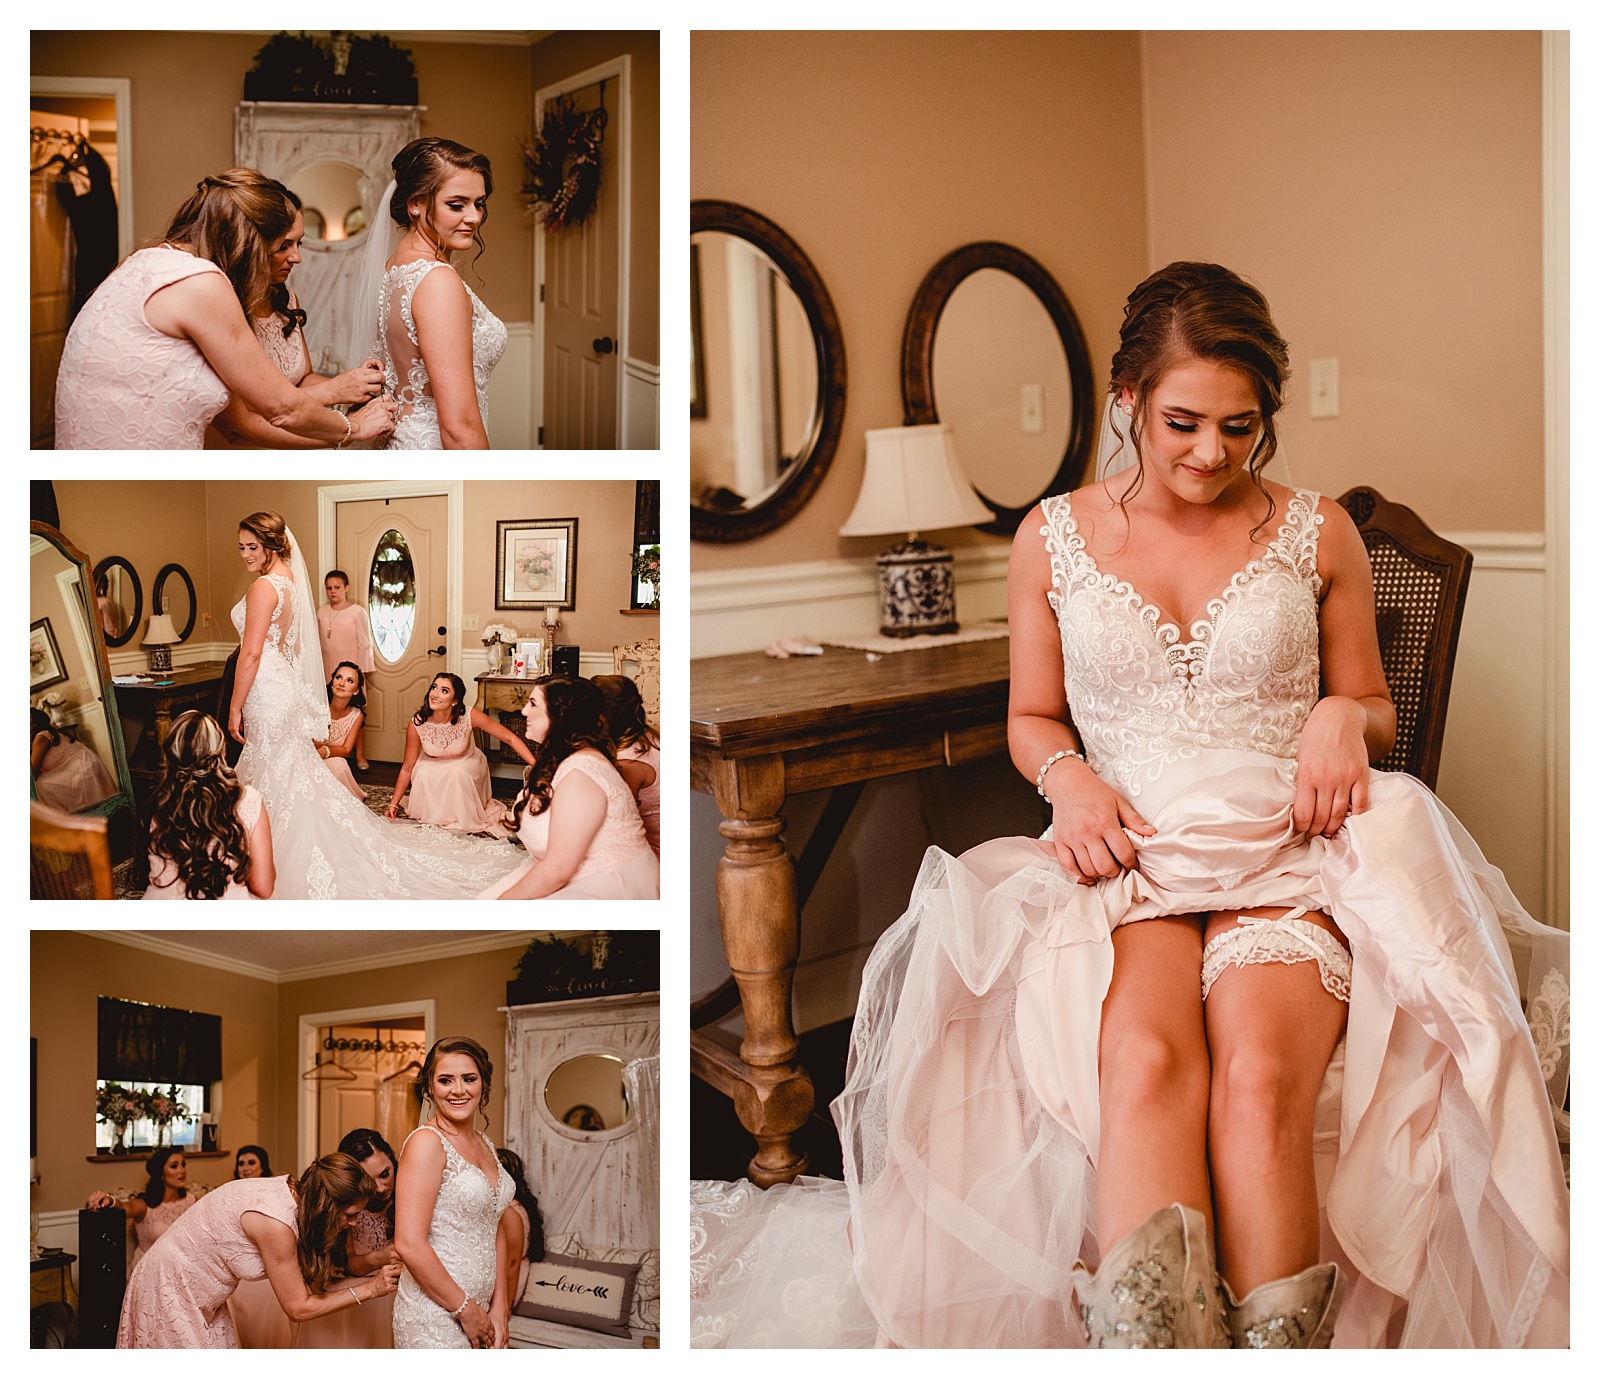 Bride getting ready photos at Southern Pines venue in Lake City, Florida. Shelly Williams Photography